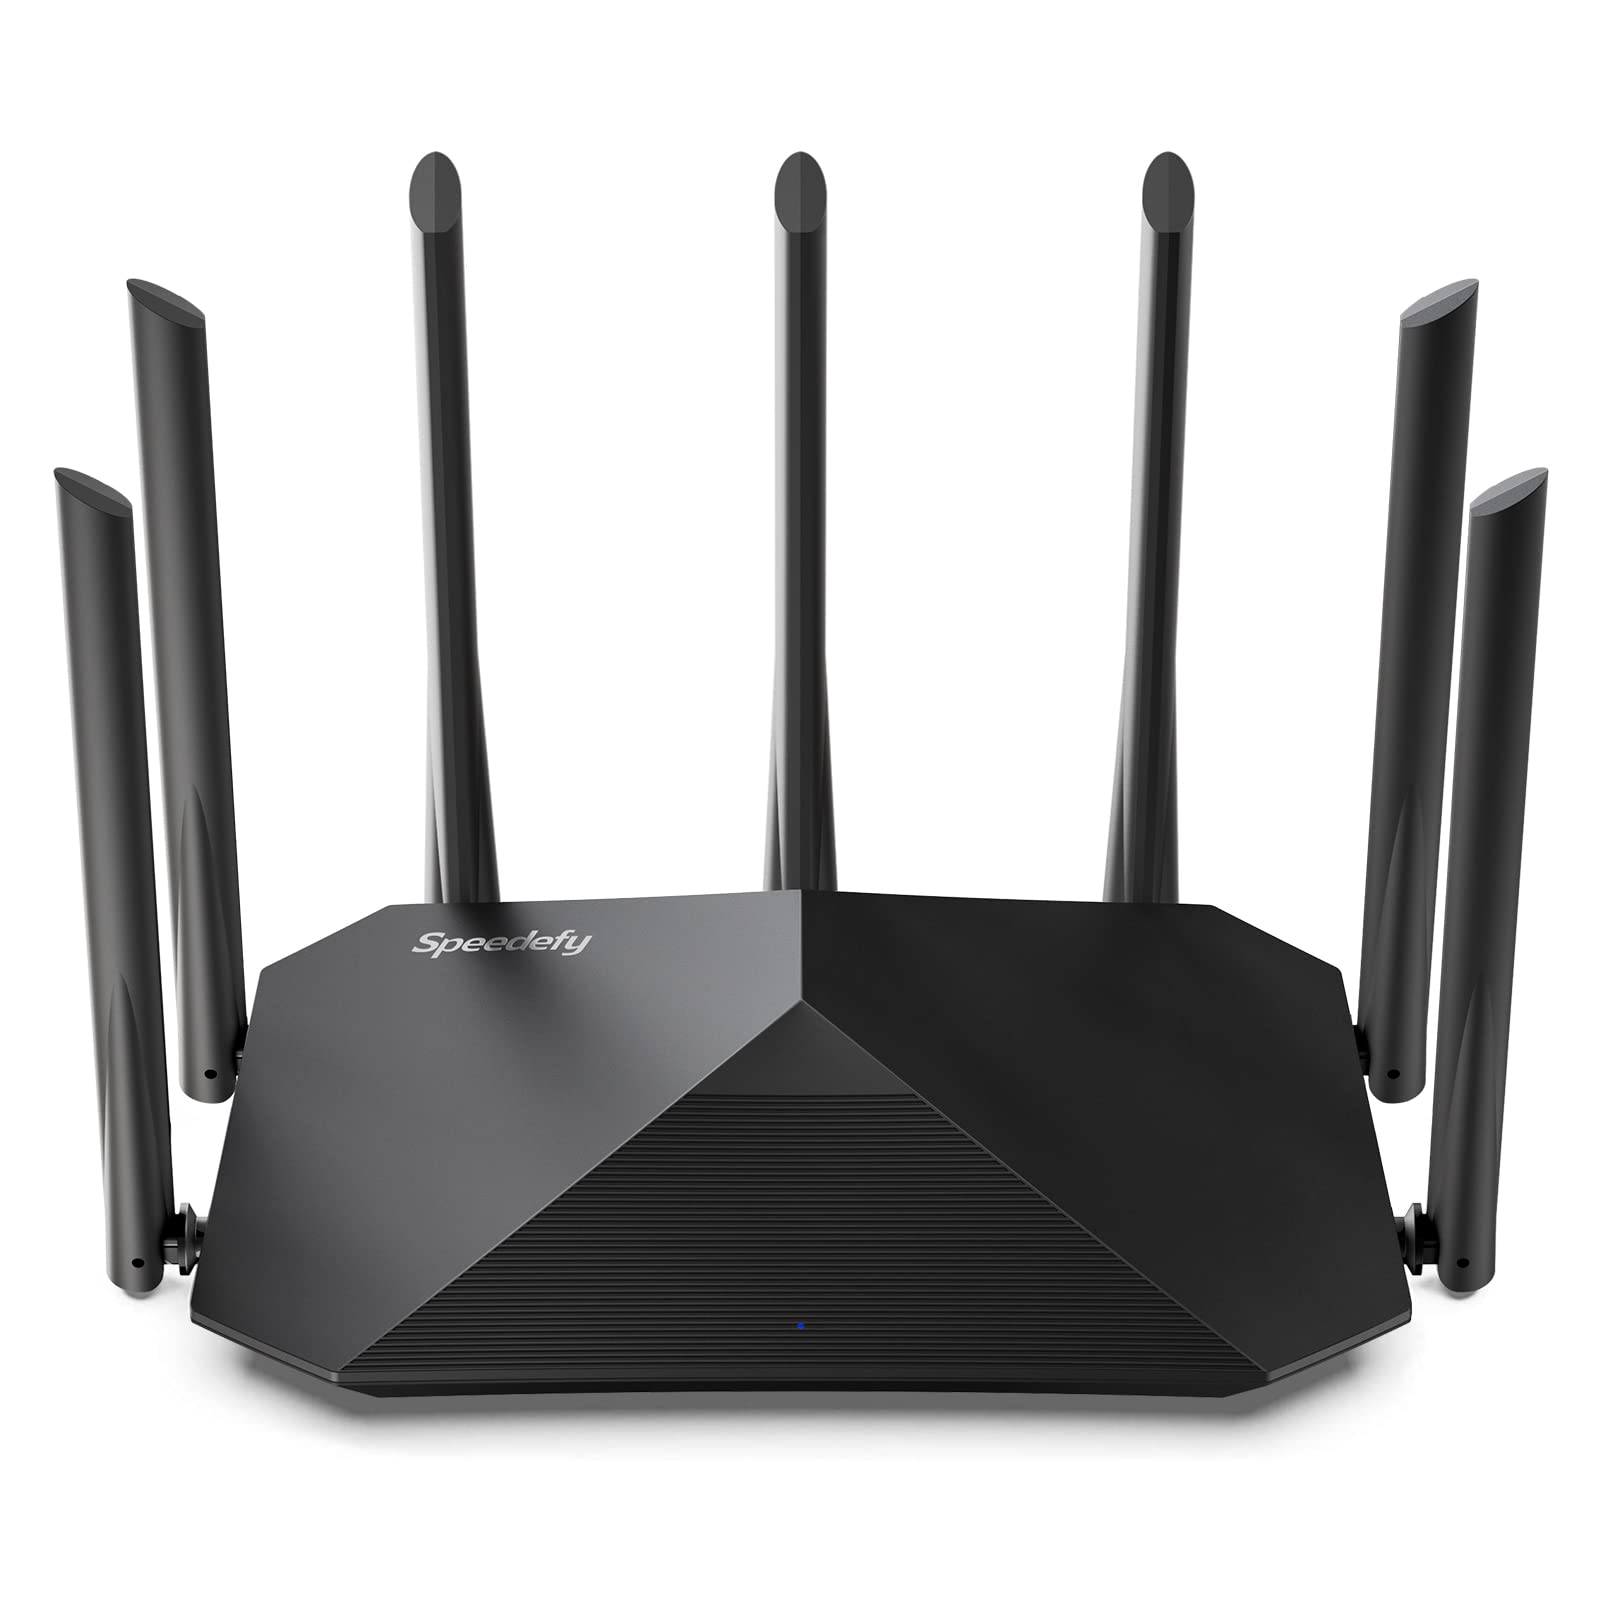 Router with strong signal bars